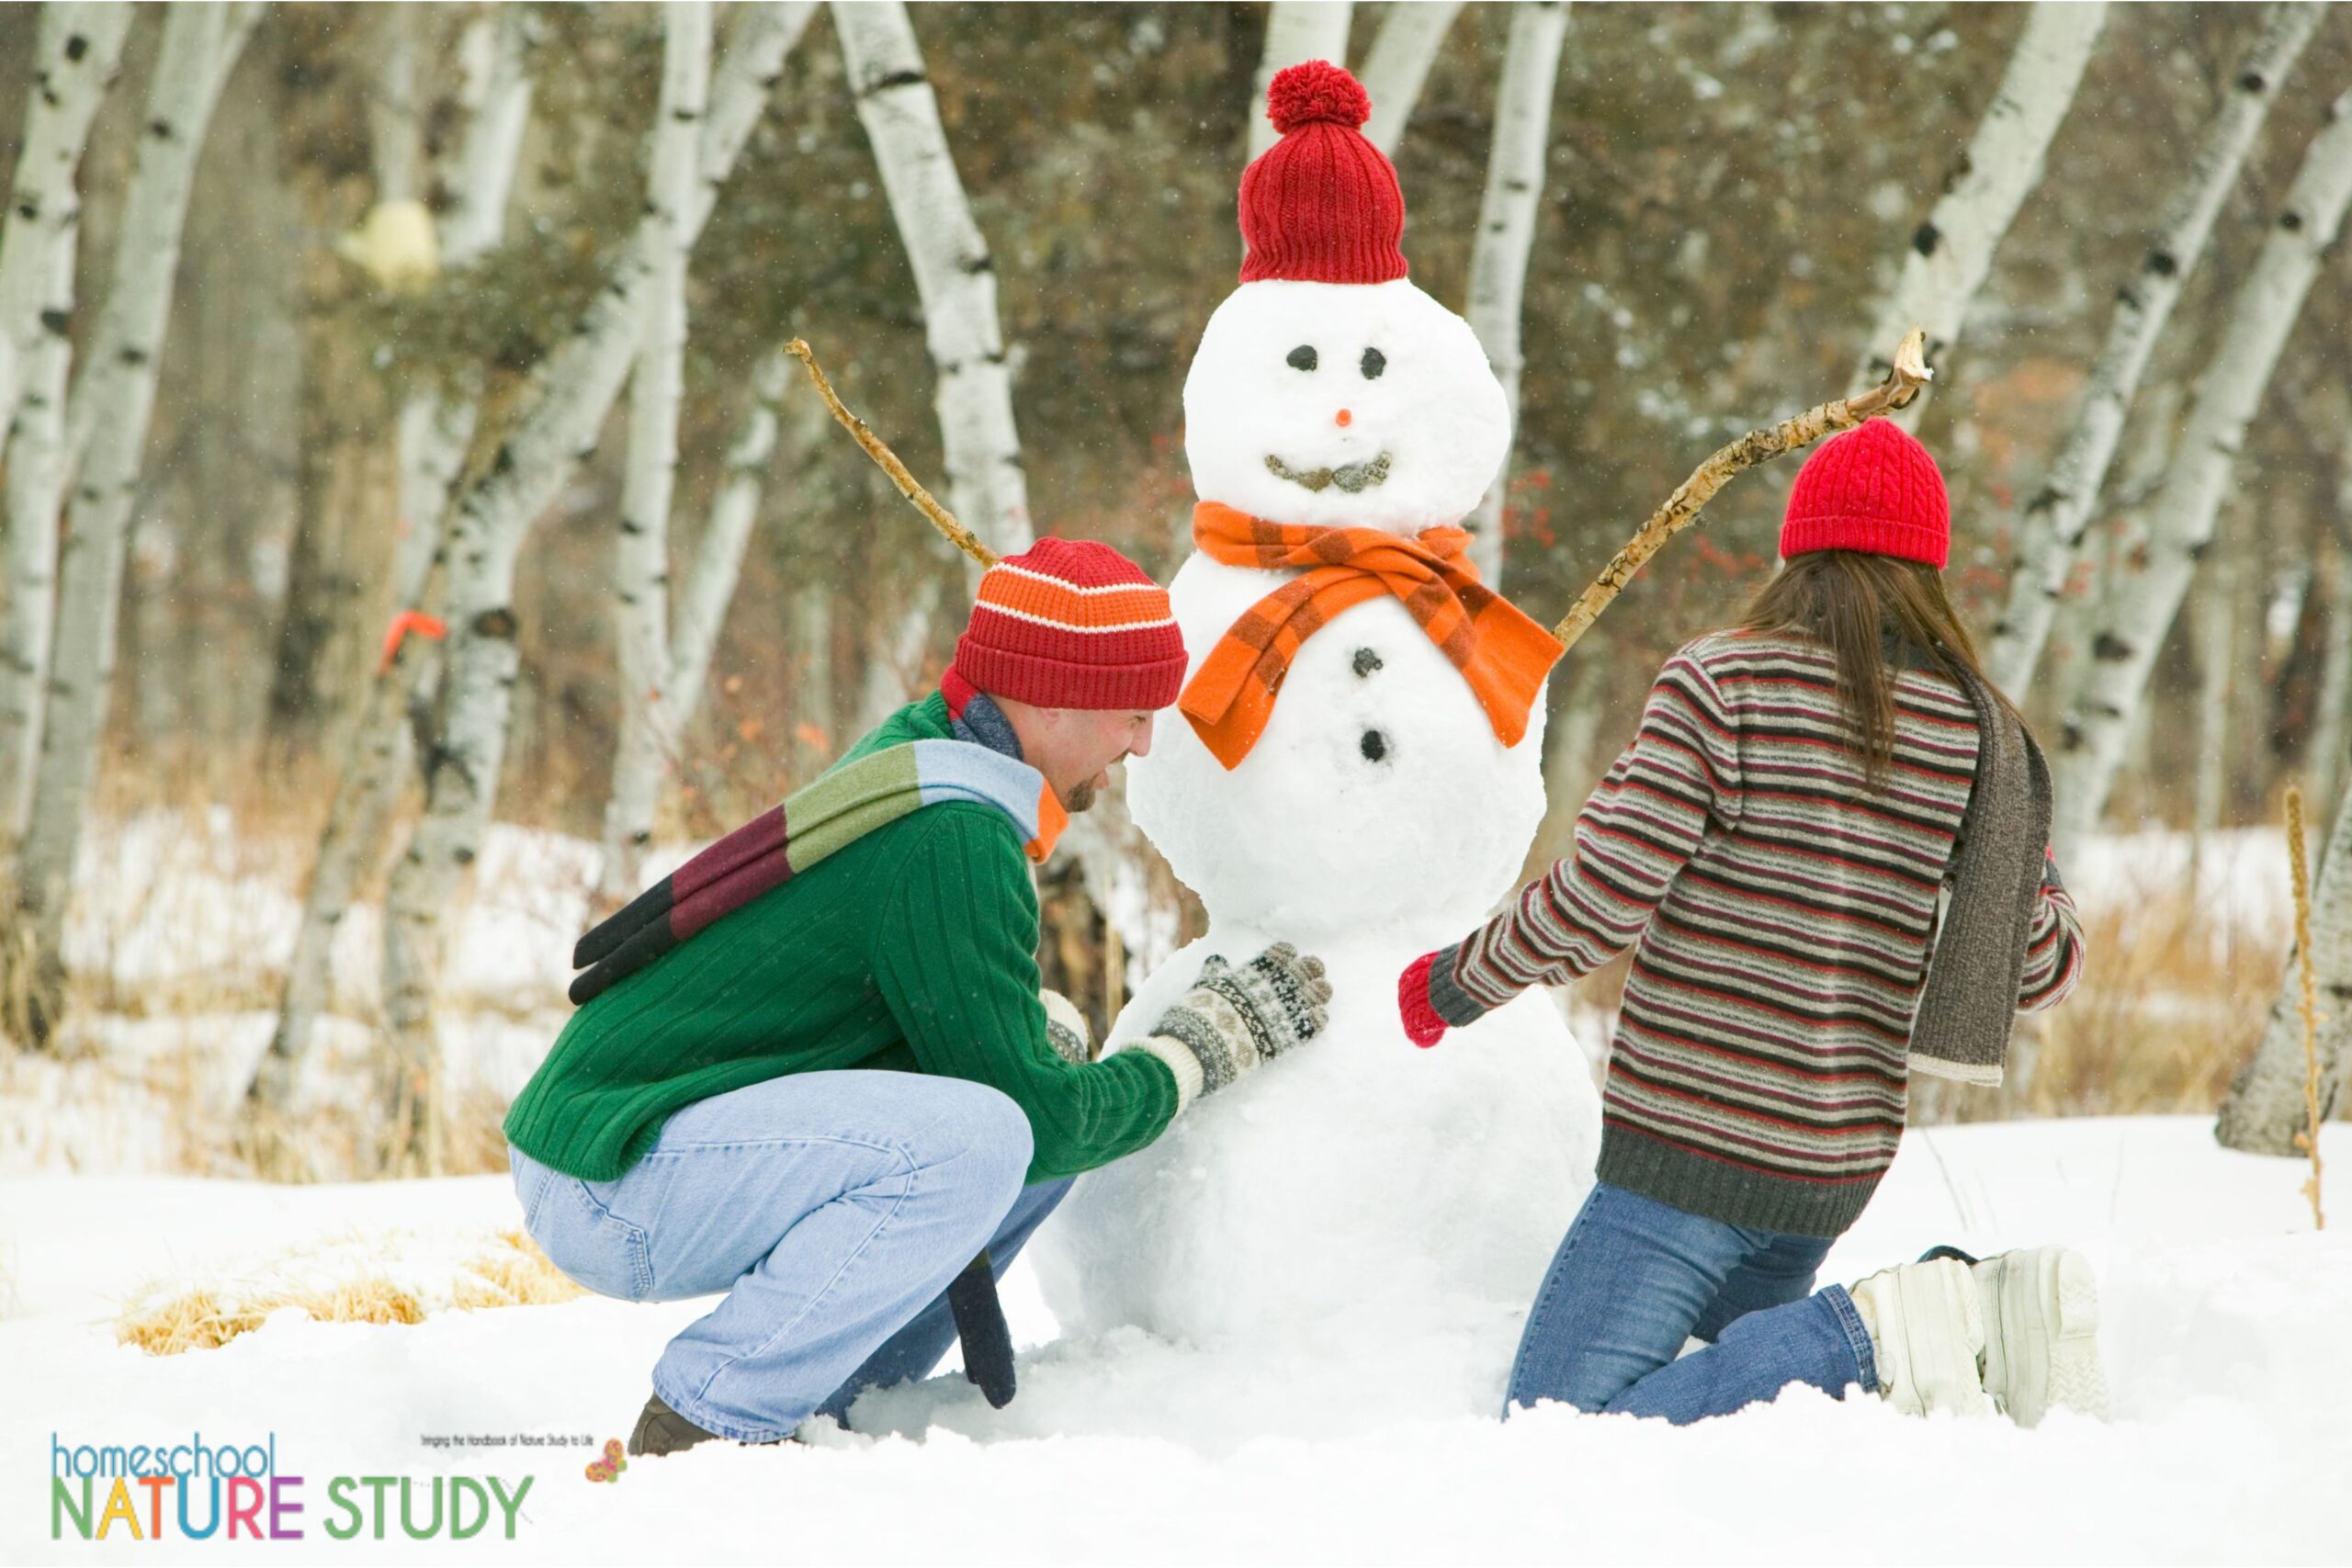 Here is how to make a snowman bird feeder in your own backyard. This is a fun winter idea for your homeschool nature study and feathered friends.